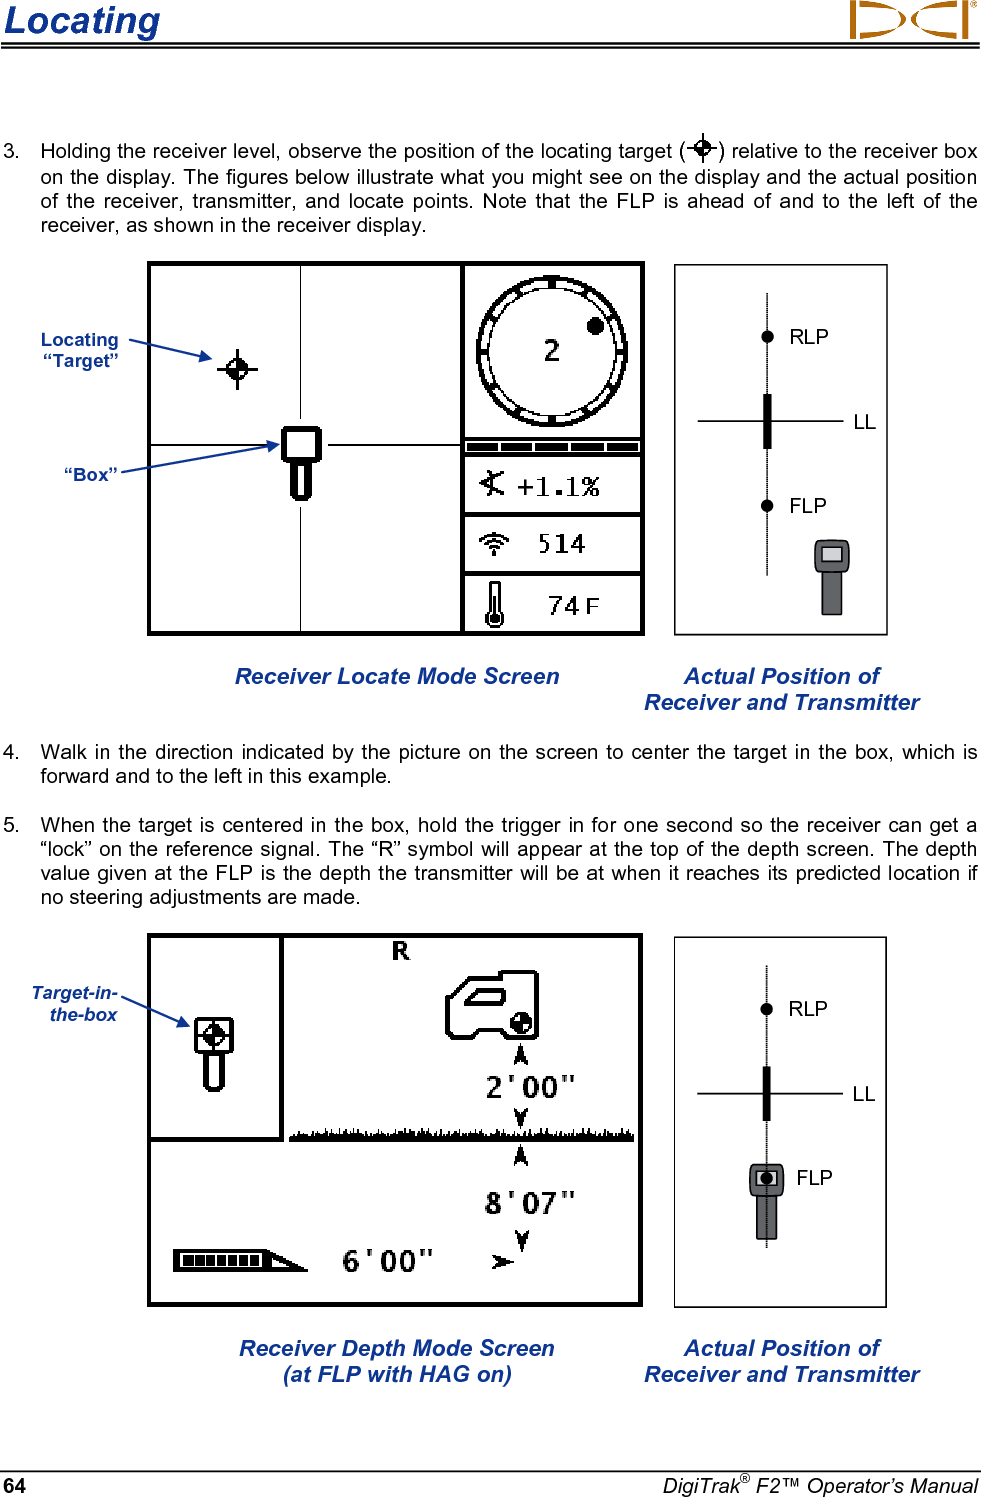 Locating     64 DigiTrak® F2™ Operator’s Manual 3. Holding the receiver level, observe the position of the locating target ( ) relative to the receiver box on the display. The figures below illustrate what you might see on the display and the actual position of the receiver, transmitter, and locate points.  Note that the FLP is ahead of and to the left of the receiver, as shown in the receiver display.   RLPFLPLL  Receiver Locate Mode Screen Actual Position of        Receiver and Transmitter 4. Walk in the direction indicated by the picture on the screen to center the target in the box,  which is forward and to the left in this example. 5. When the target is centered in the box, hold the trigger in for one second so the receiver can get a “lock” on the reference signal. The “R” symbol will appear at the top of the depth screen. The depth value given at the FLP is the depth the transmitter will be at when it reaches its predicted location if no steering adjustments are made.    RLPFLPLL  Receiver Depth Mode Screen Actual Position of     (at FLP with HAG on) Receiver and Transmitter Locating “Target” “Box” Target-in-the-box  + 